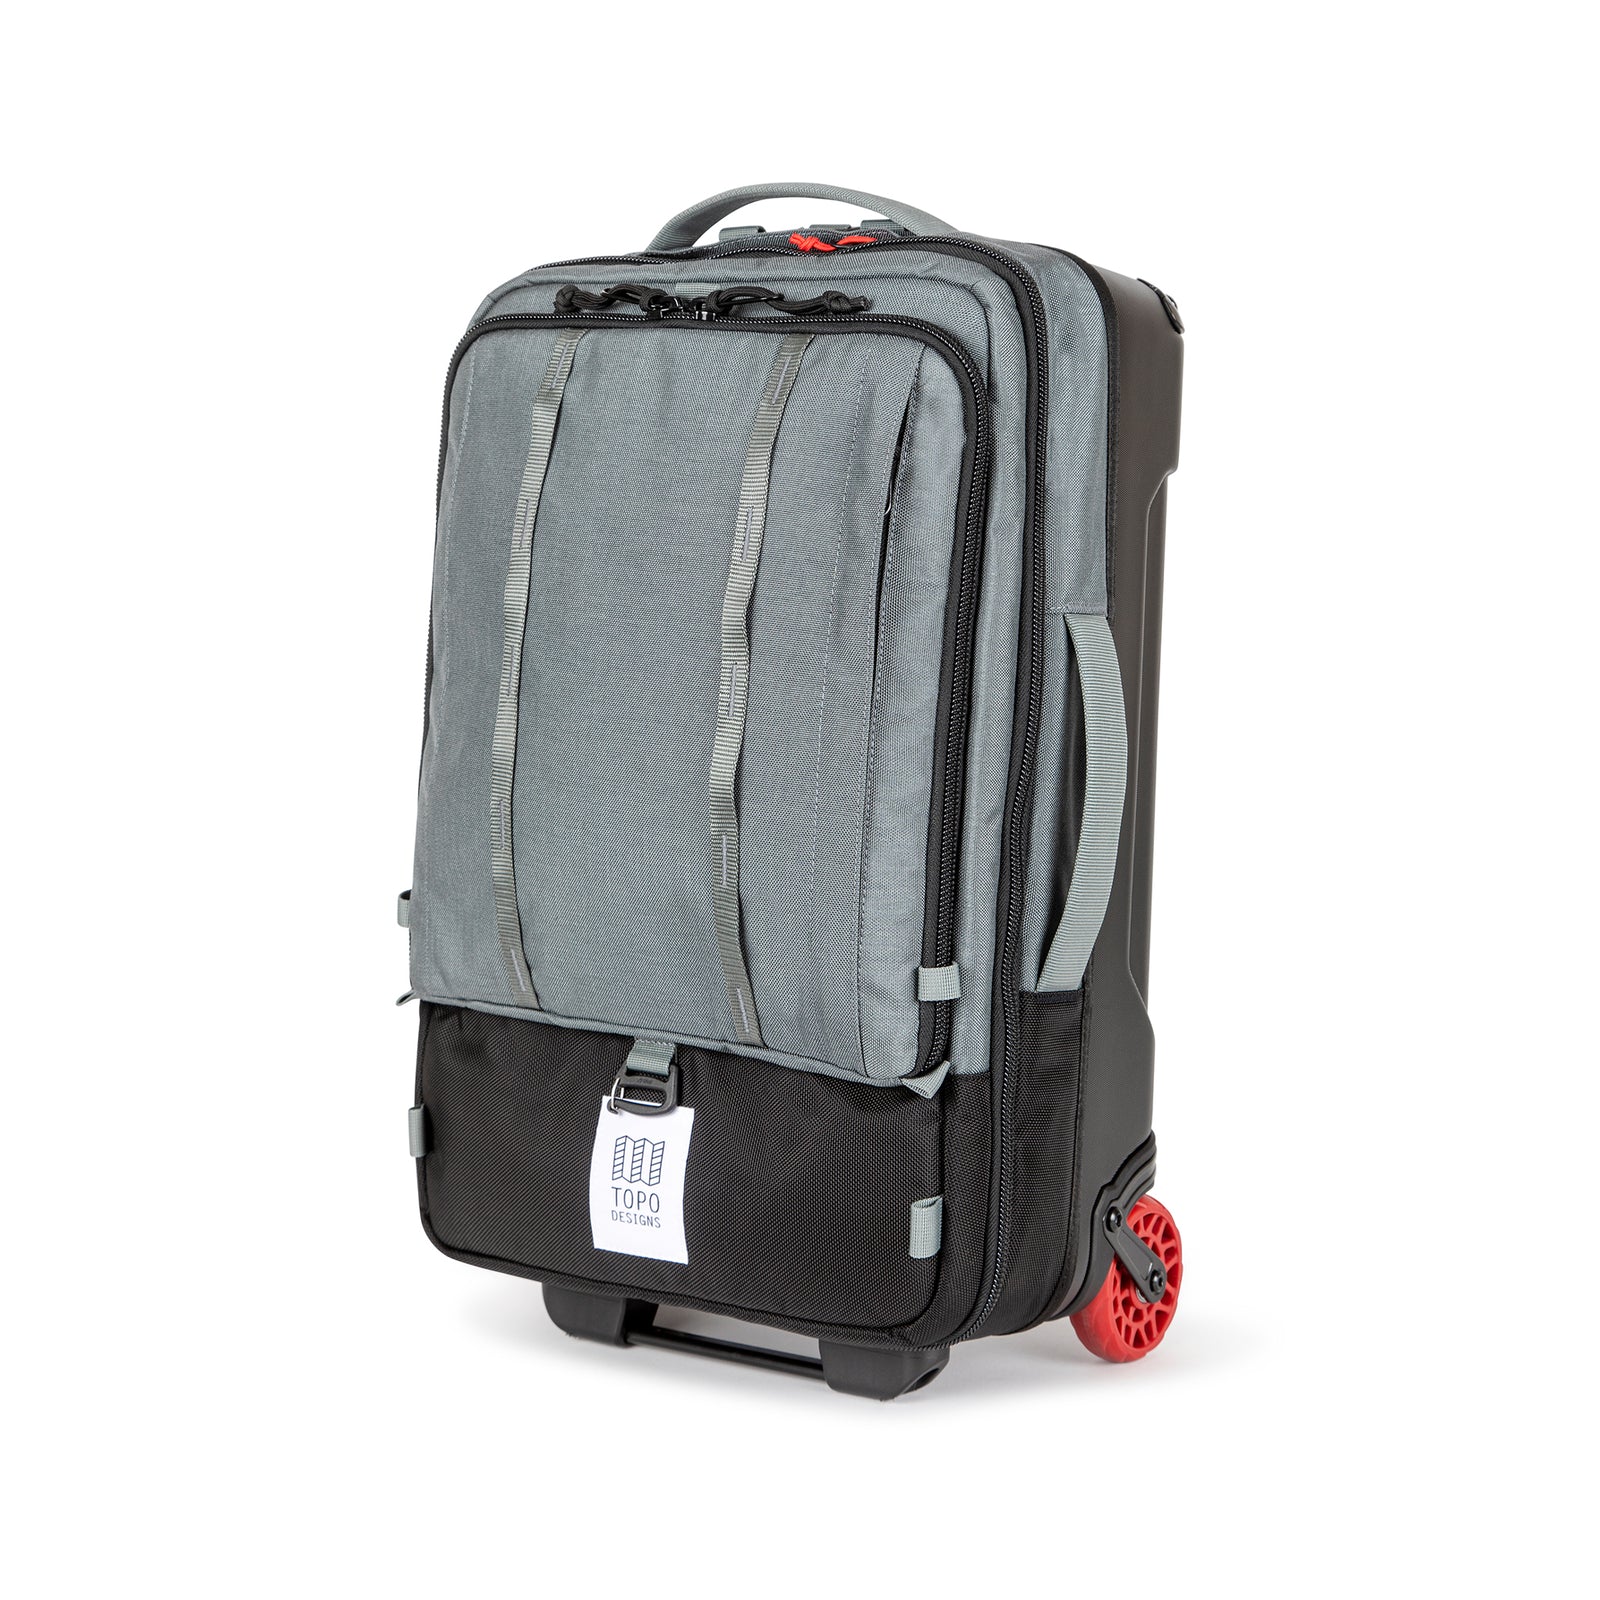 Topo Designs Global Travel Bag Roller durable carry-on convertible laptop backpack rolling suitcase in "Charcoal" gray.